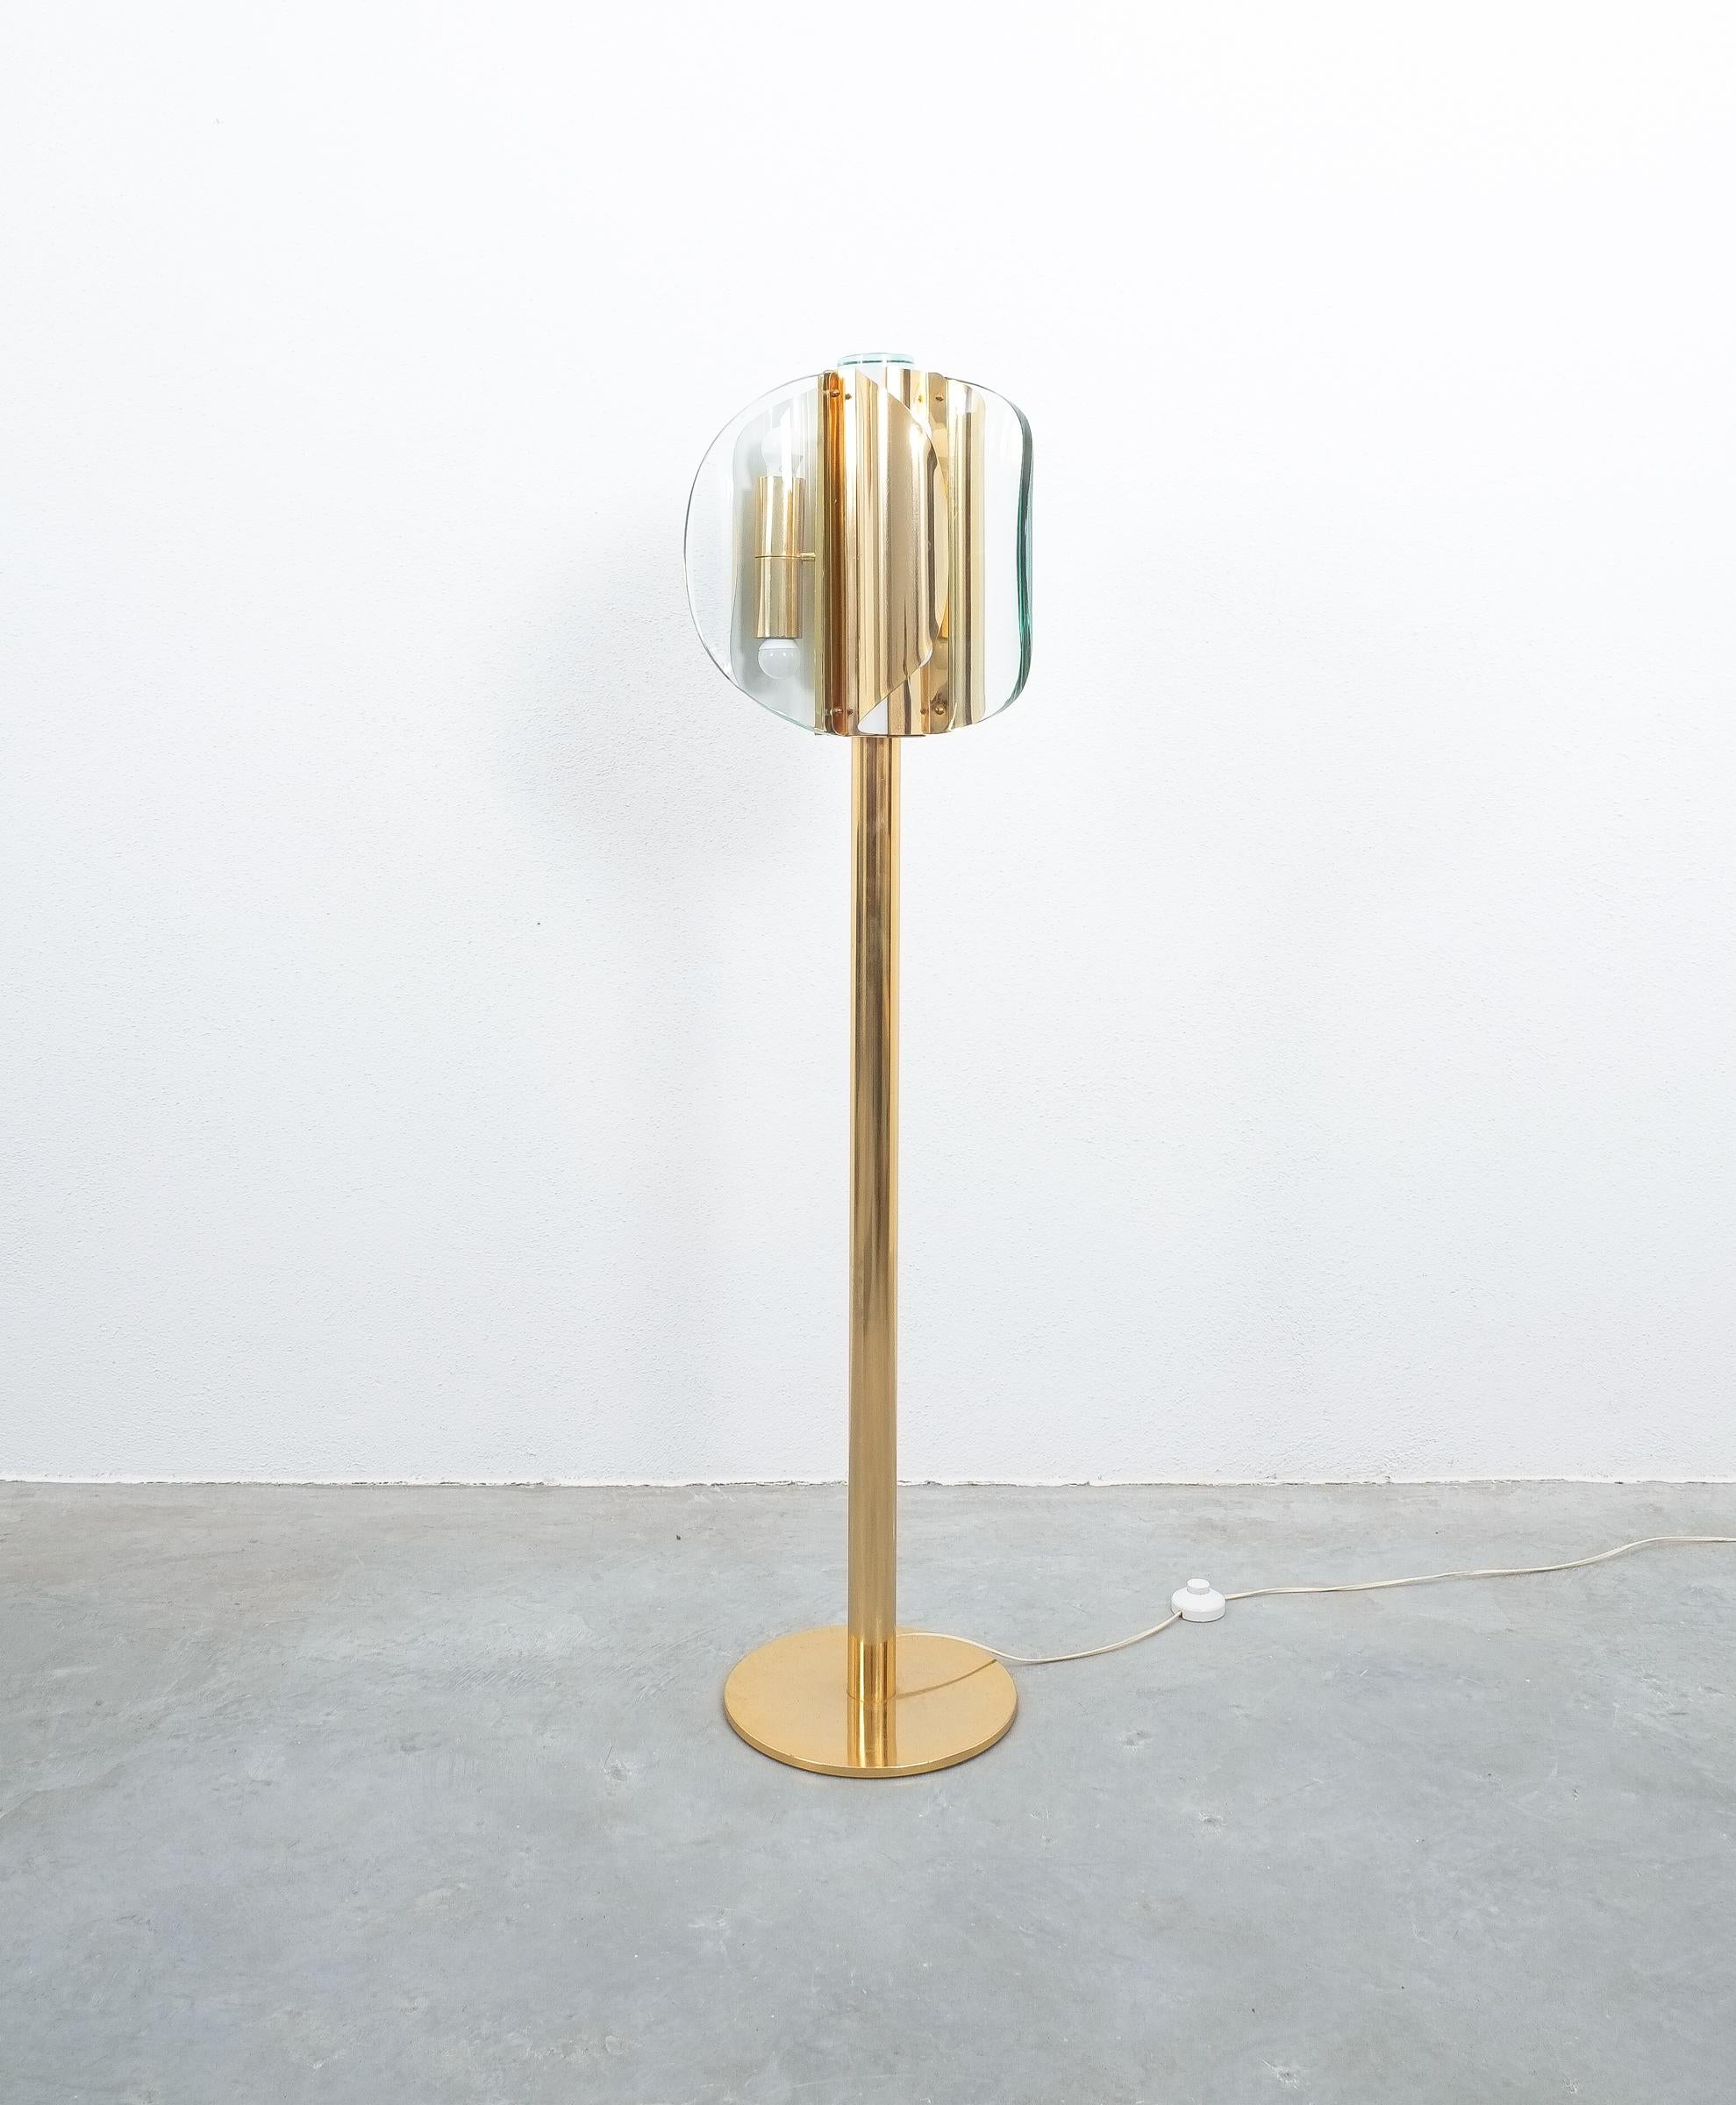 Rare floor lamp style Fontana Arte brass glass, Italy, circa 1965

Rare floor light comprised of brass, curved glass, Italy, 1965. Handmade from three thick curved glass slabs orbiting around a central brass tube. This light has got a total of